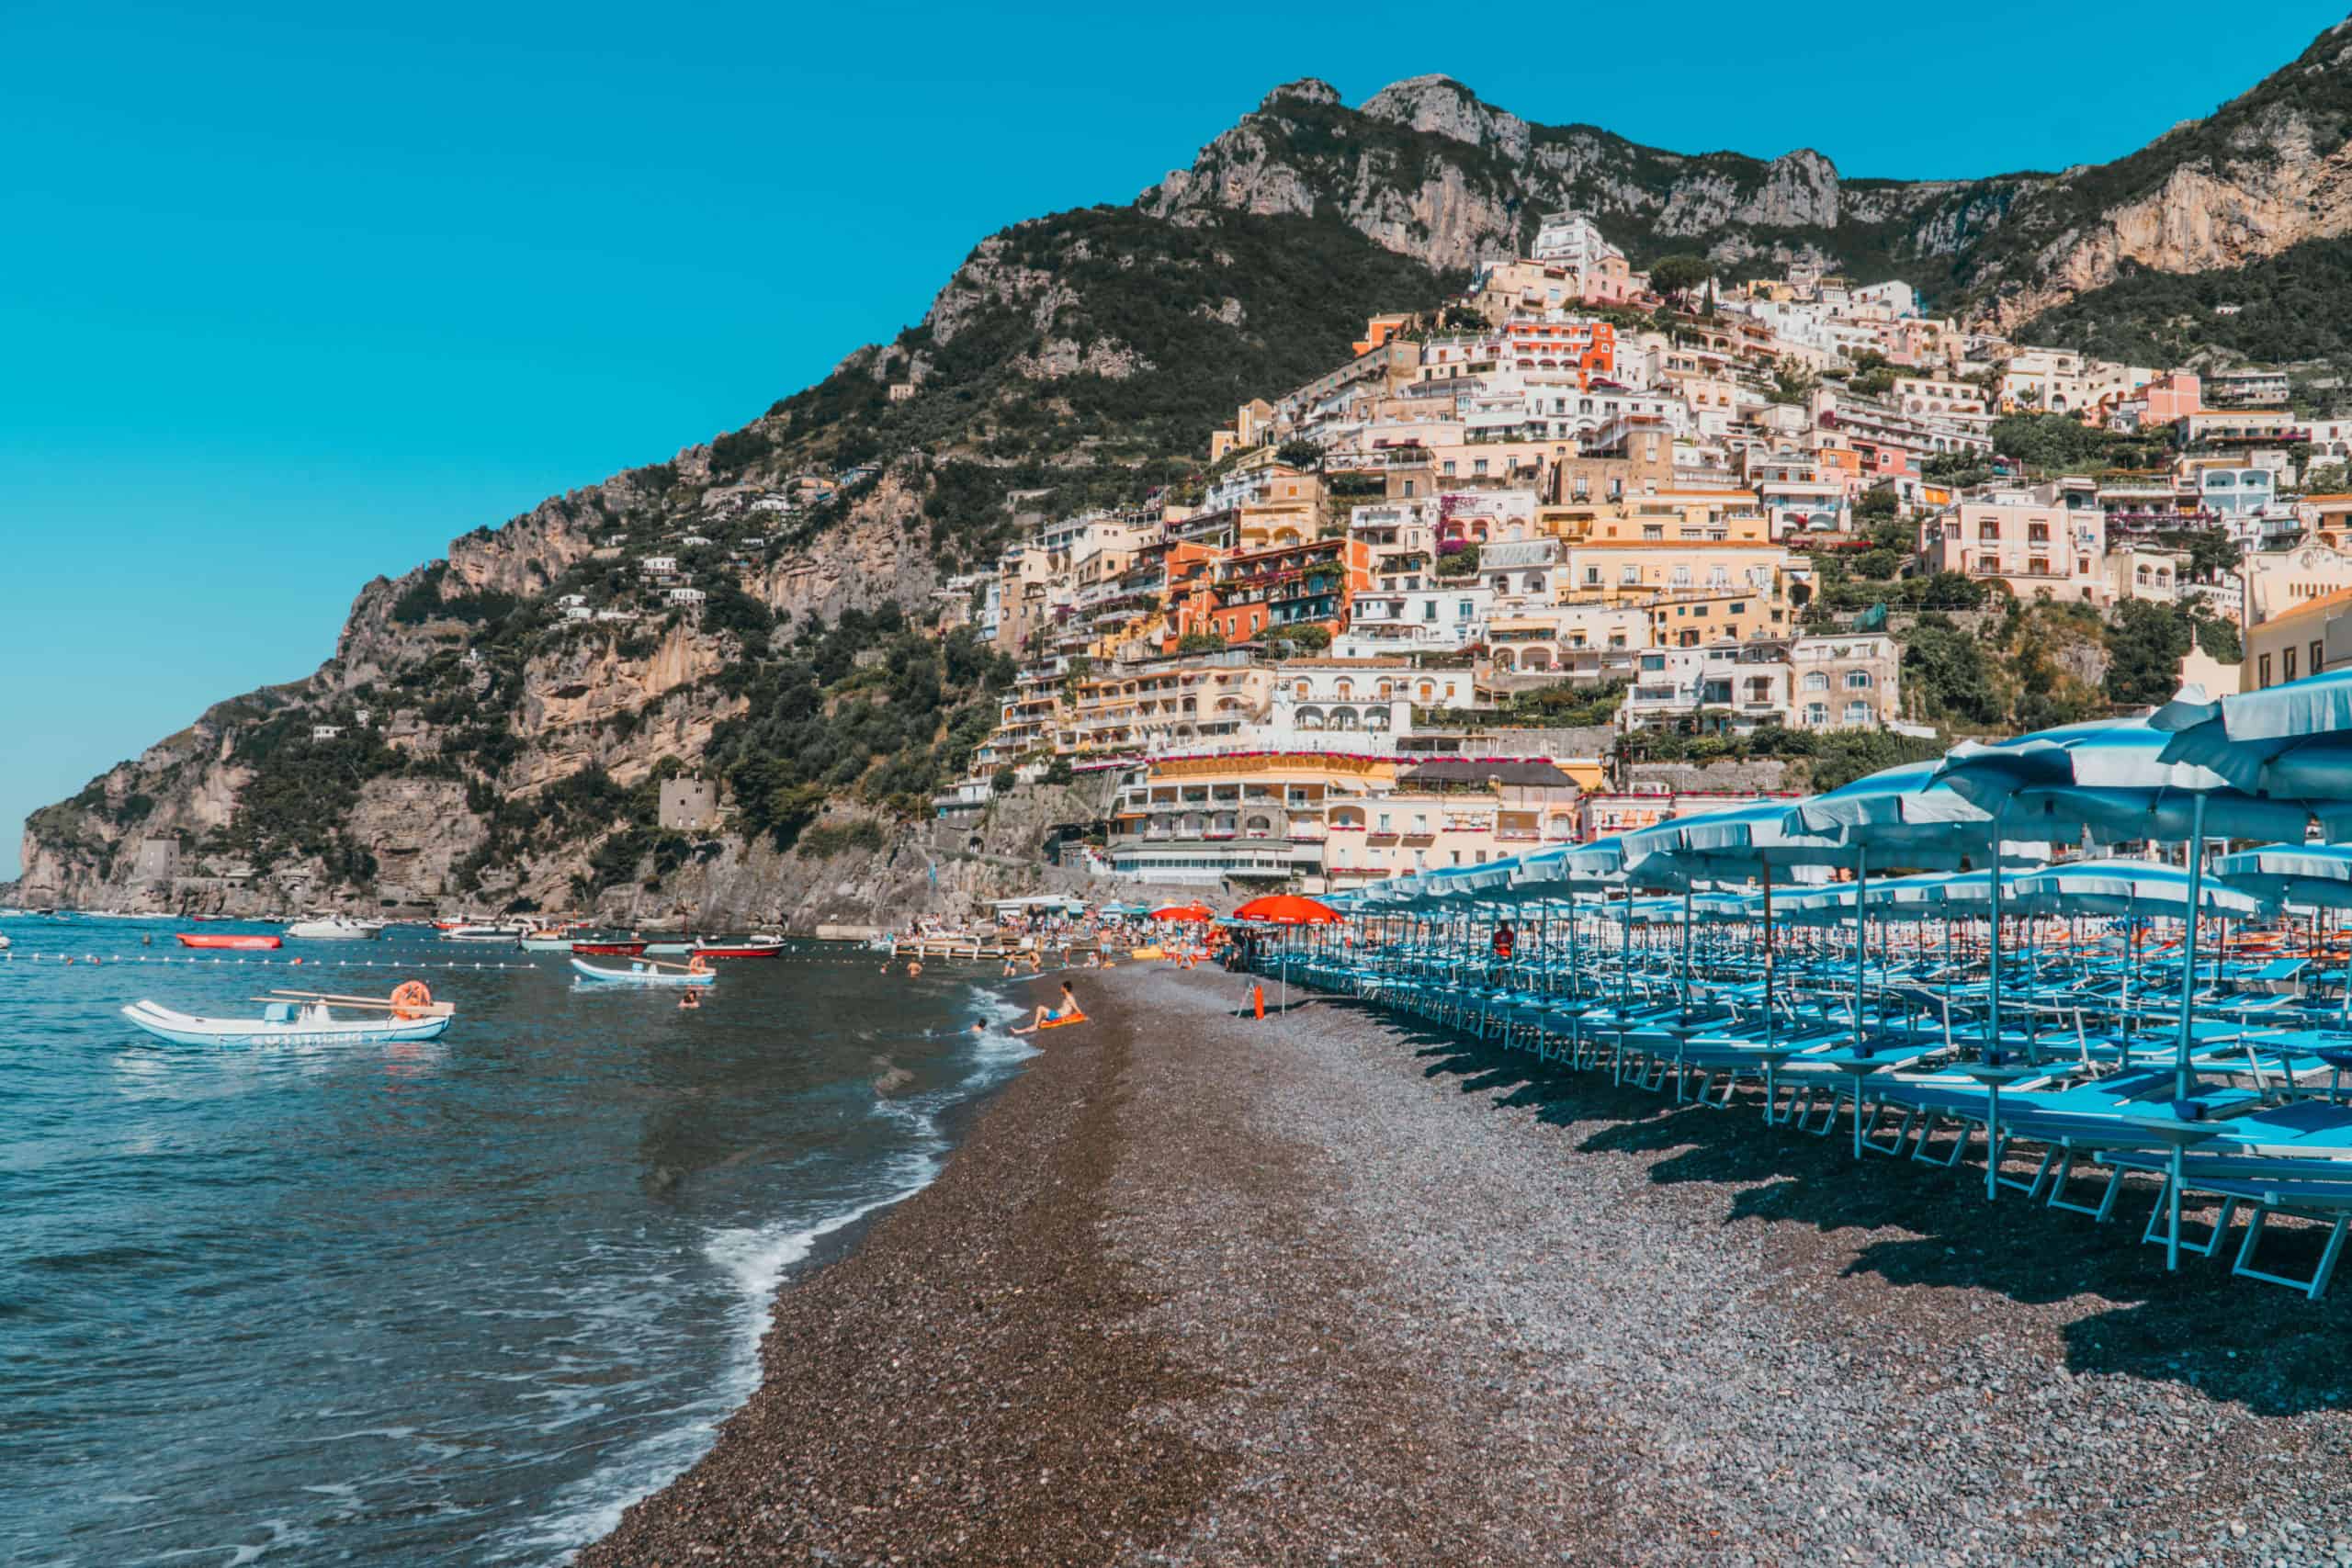 Colorful beach chairs and umbrellas on the beach in Positano, Italy